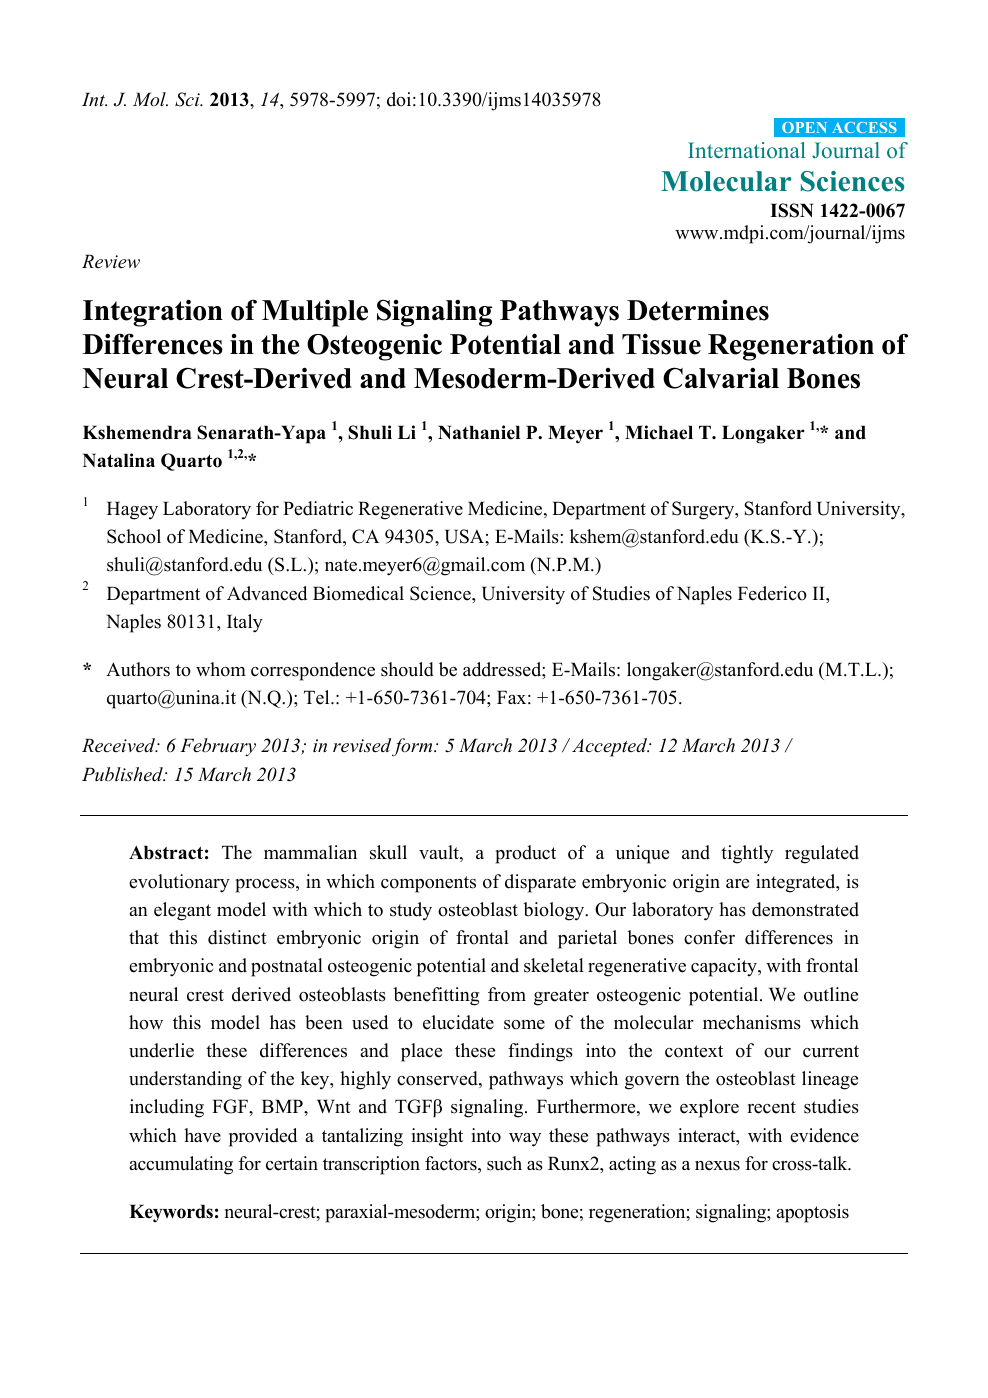 Integration Of Multiple Signaling Pathways Determines Differences In The Osteogenic Potential And Tissue Regeneration Of Neural Crest Derived And Mesoderm Derived Calvarial Bones Topic Of Research Paper In Biological Sciences Download Scholarly Article